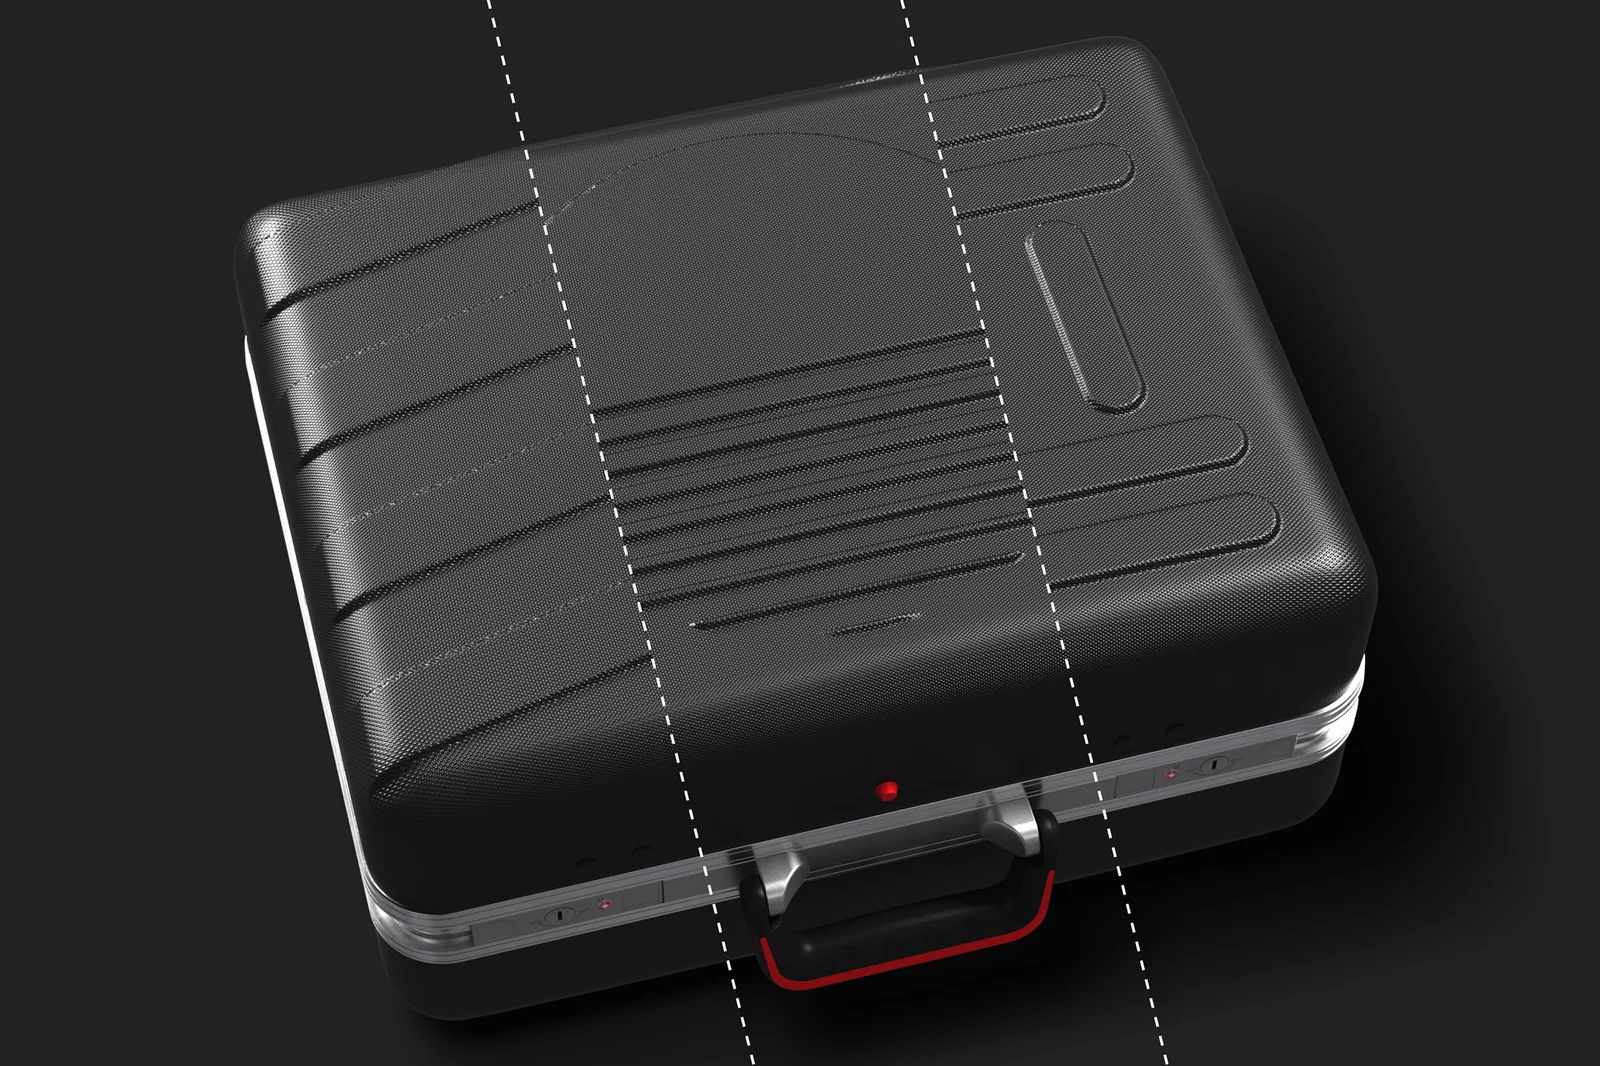 Product illustration with 3 different case designs